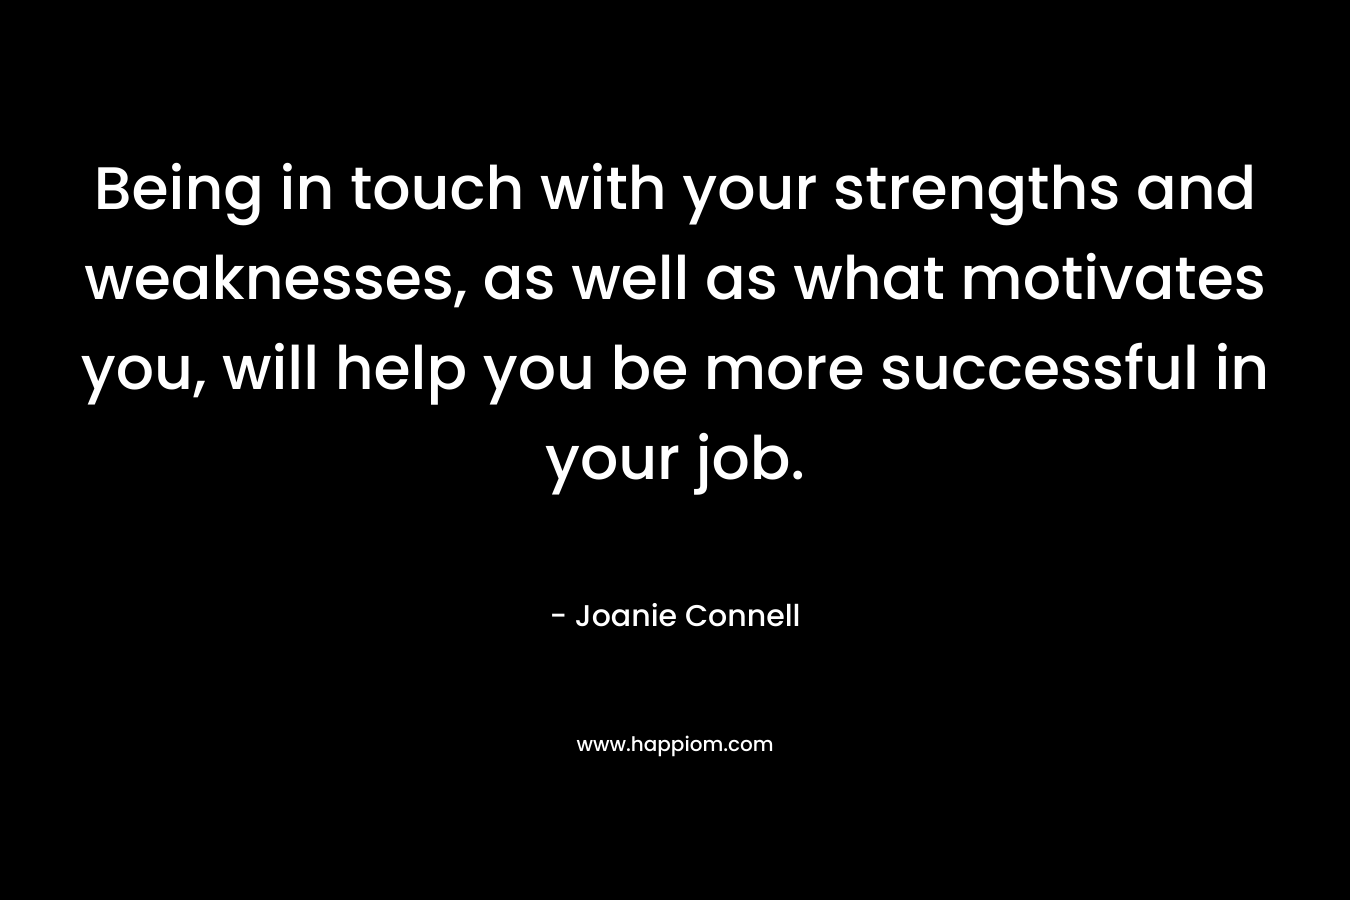 Being in touch with your strengths and weaknesses, as well as what motivates you, will help you be more successful in your job.